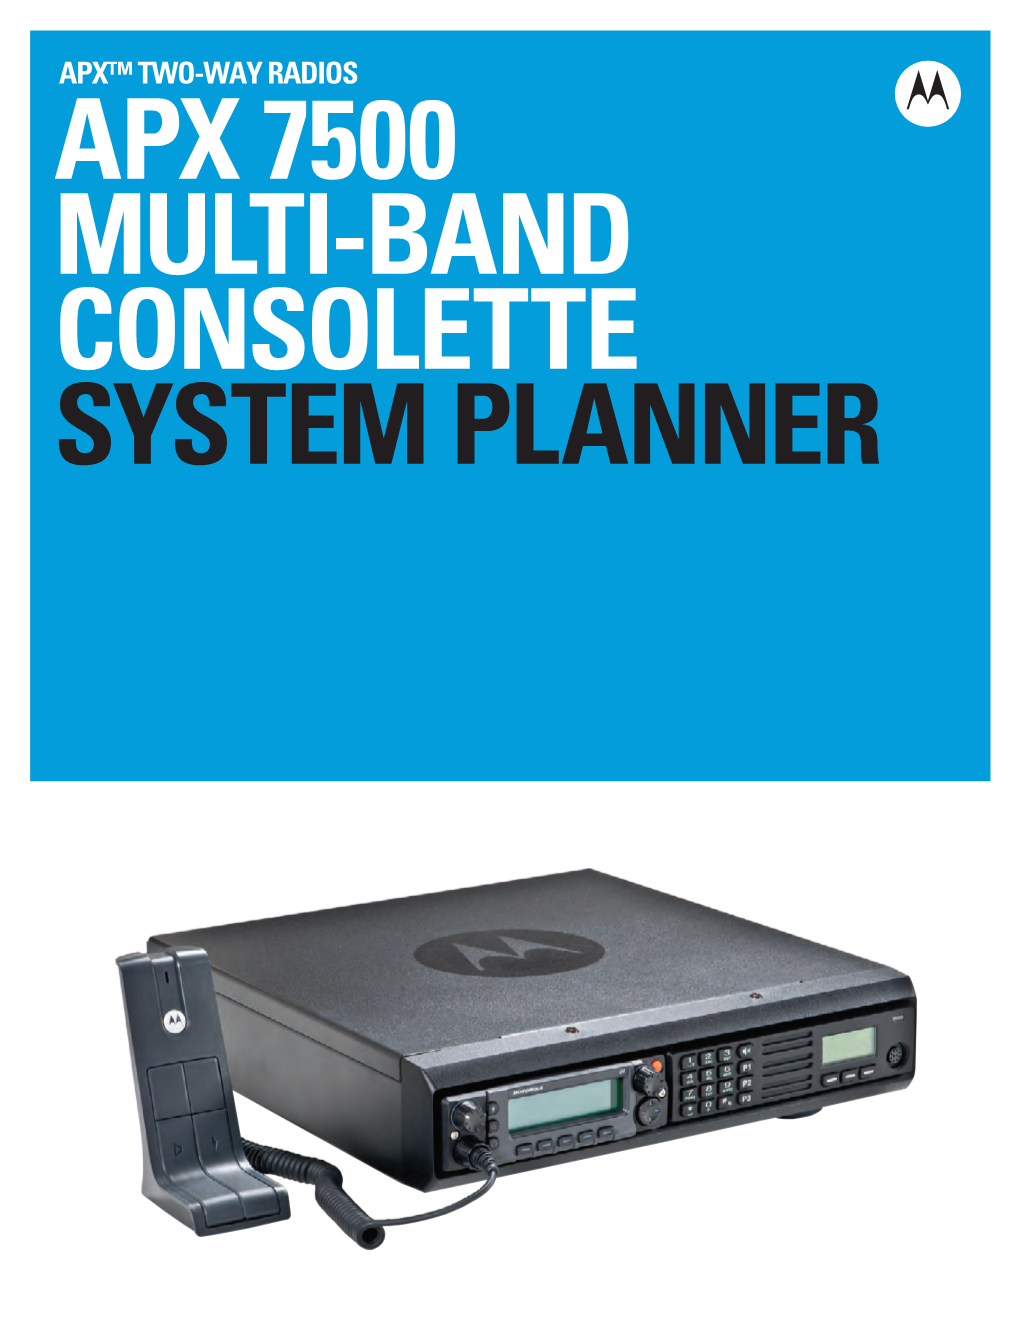 APX Consolette System Planner